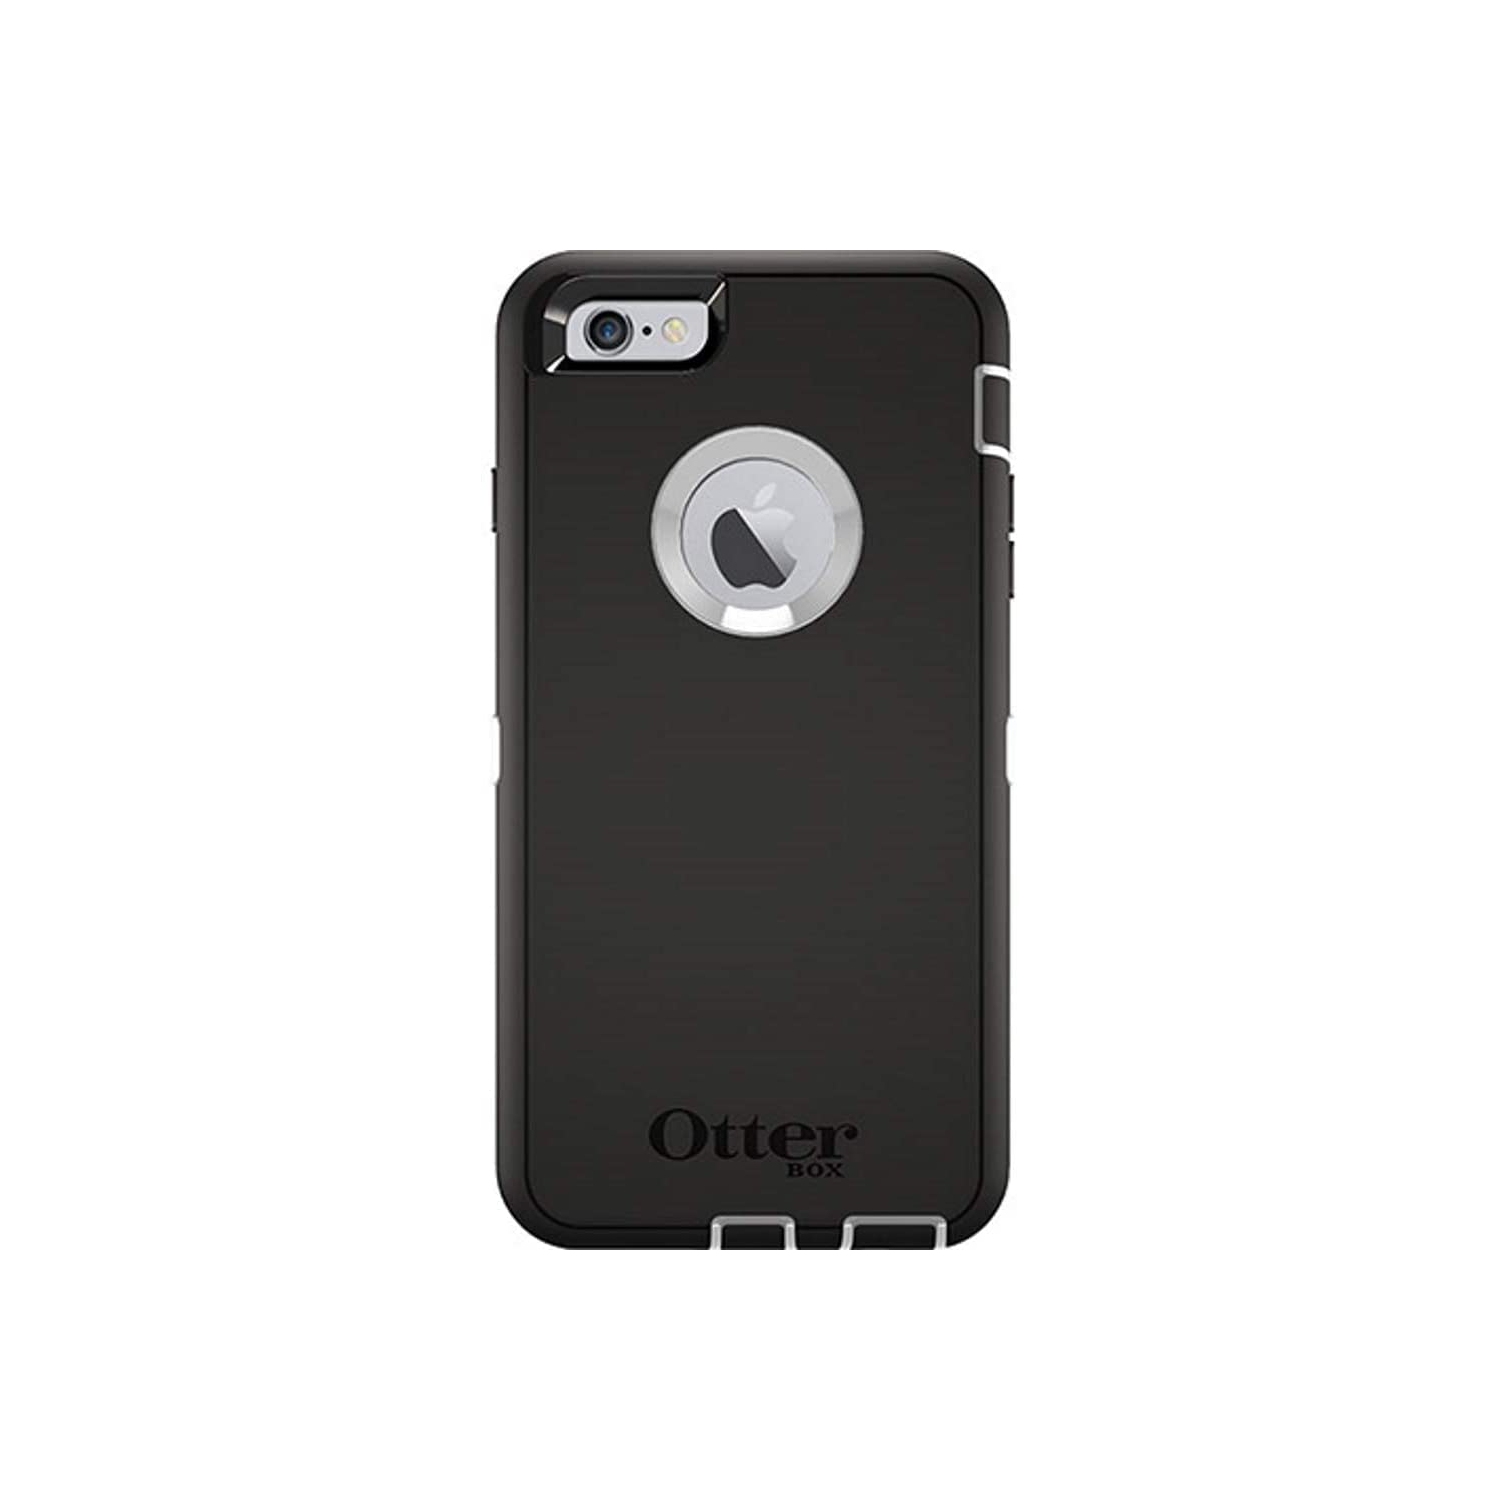 OtterBox Defender Series Rugged Case for iPhone 8, 7, 6s, 6 Plus (PLUS ONLY ) Non-Retail Packaging - Black/White - CASE ONLY